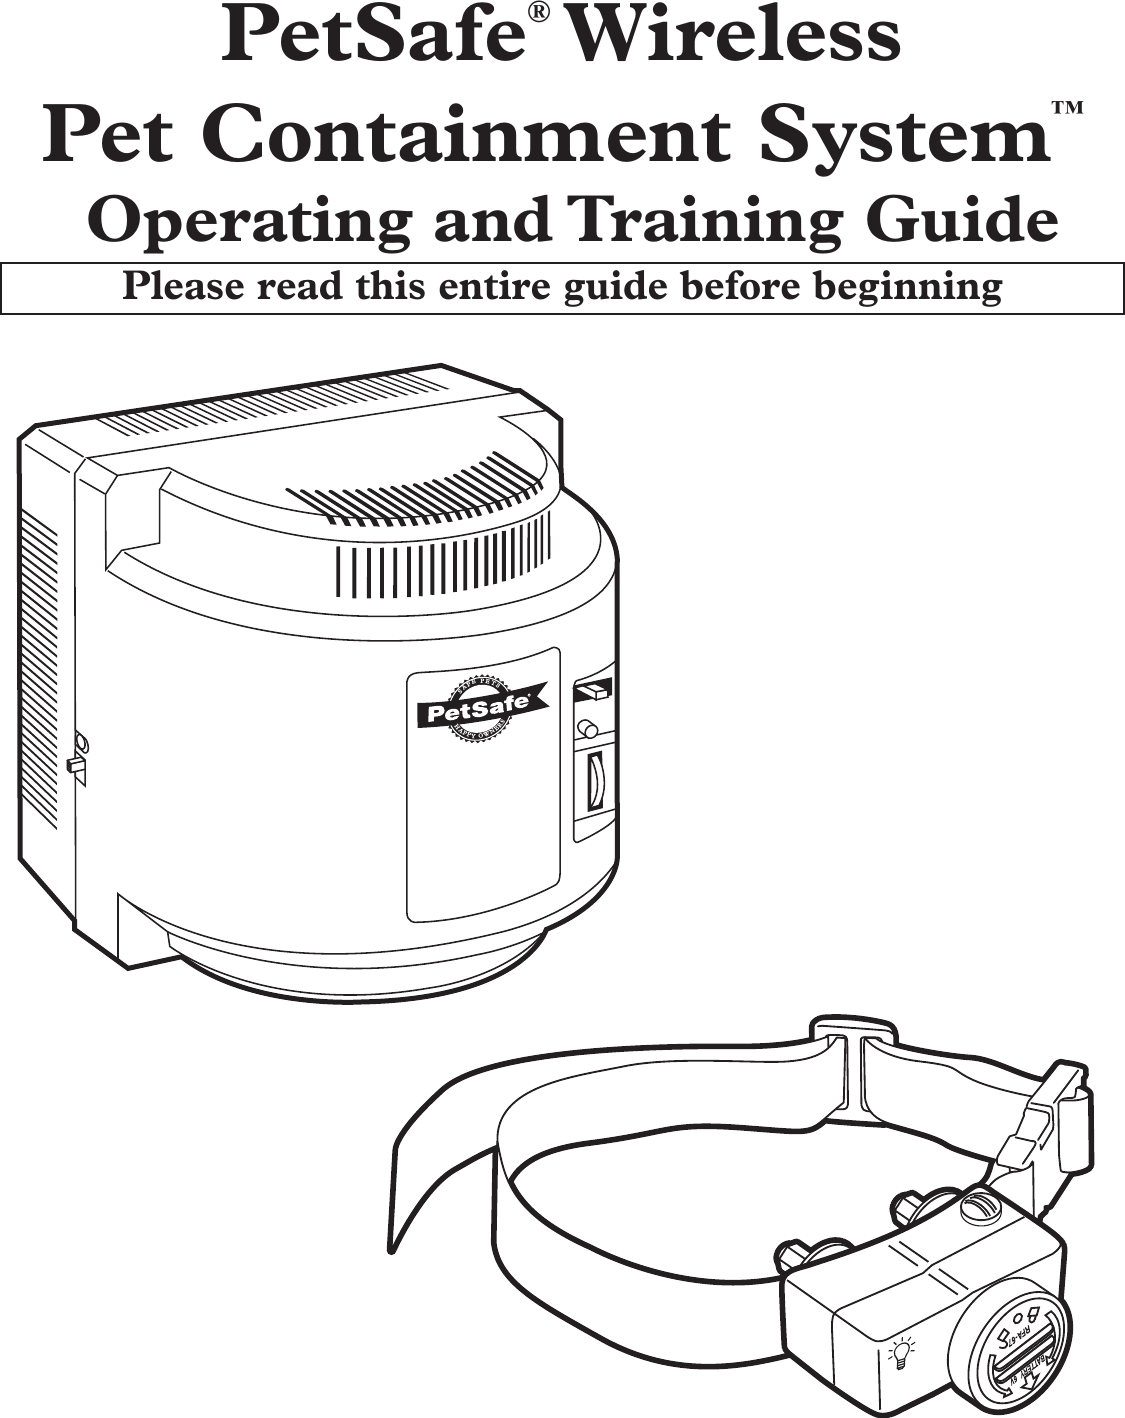 PetSafe® WirelessPet Containment System™ Operating and Training GuidePlease read this entire guide before beginningHAPPYOWNERSSAFEPETS